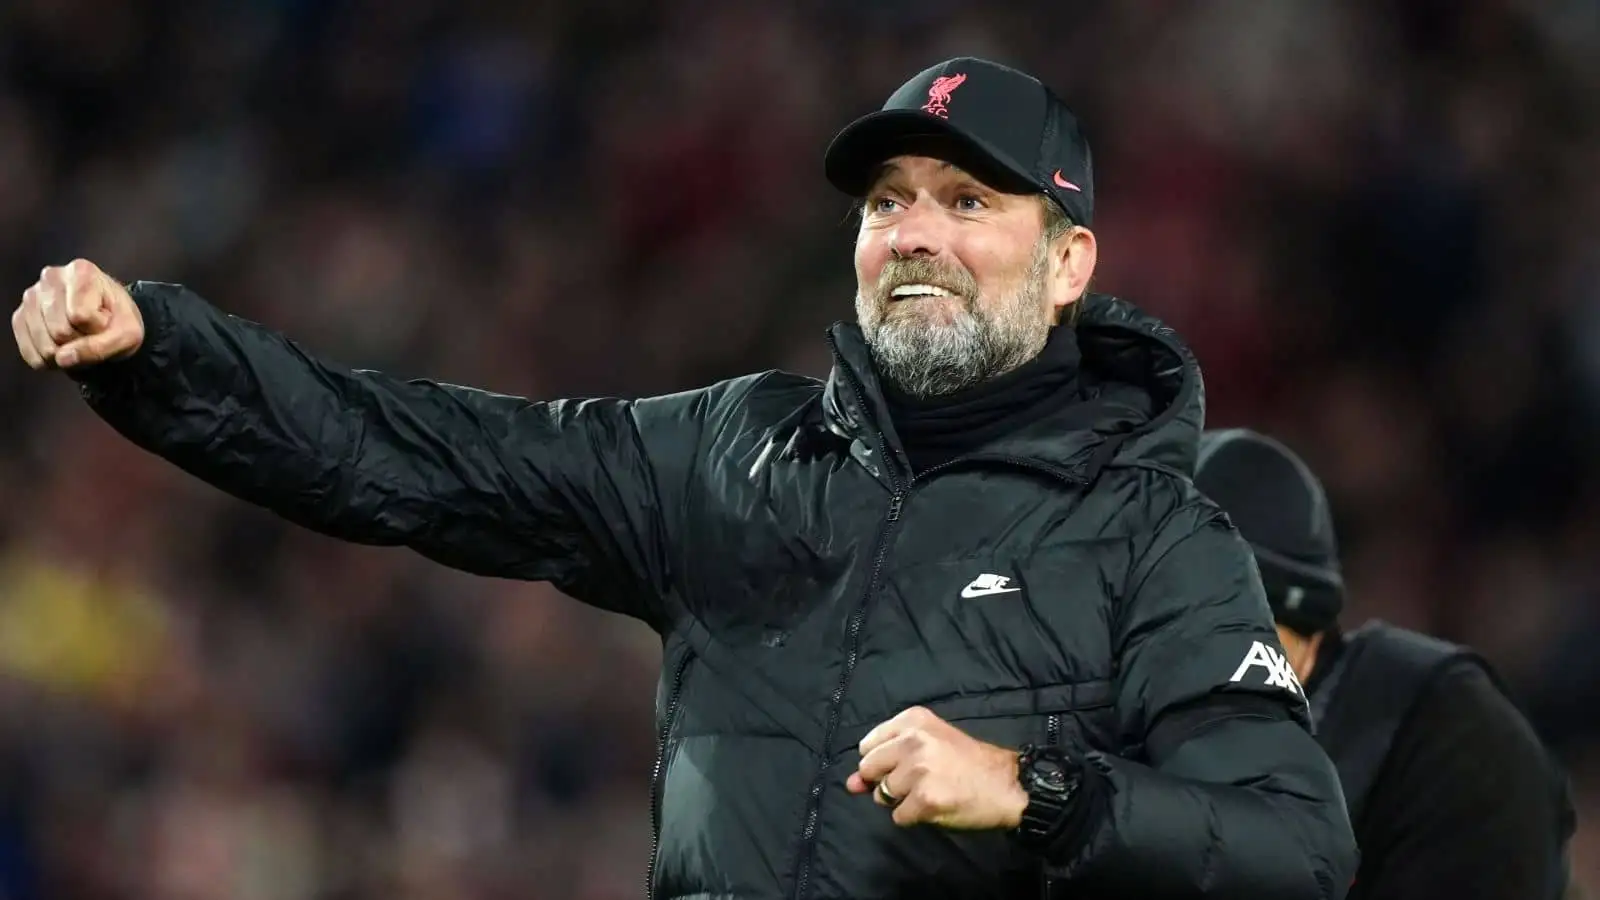 Liverpool manager Jurgen Klopp celebrates victory during the Premier League match at Anfield, Liverpool